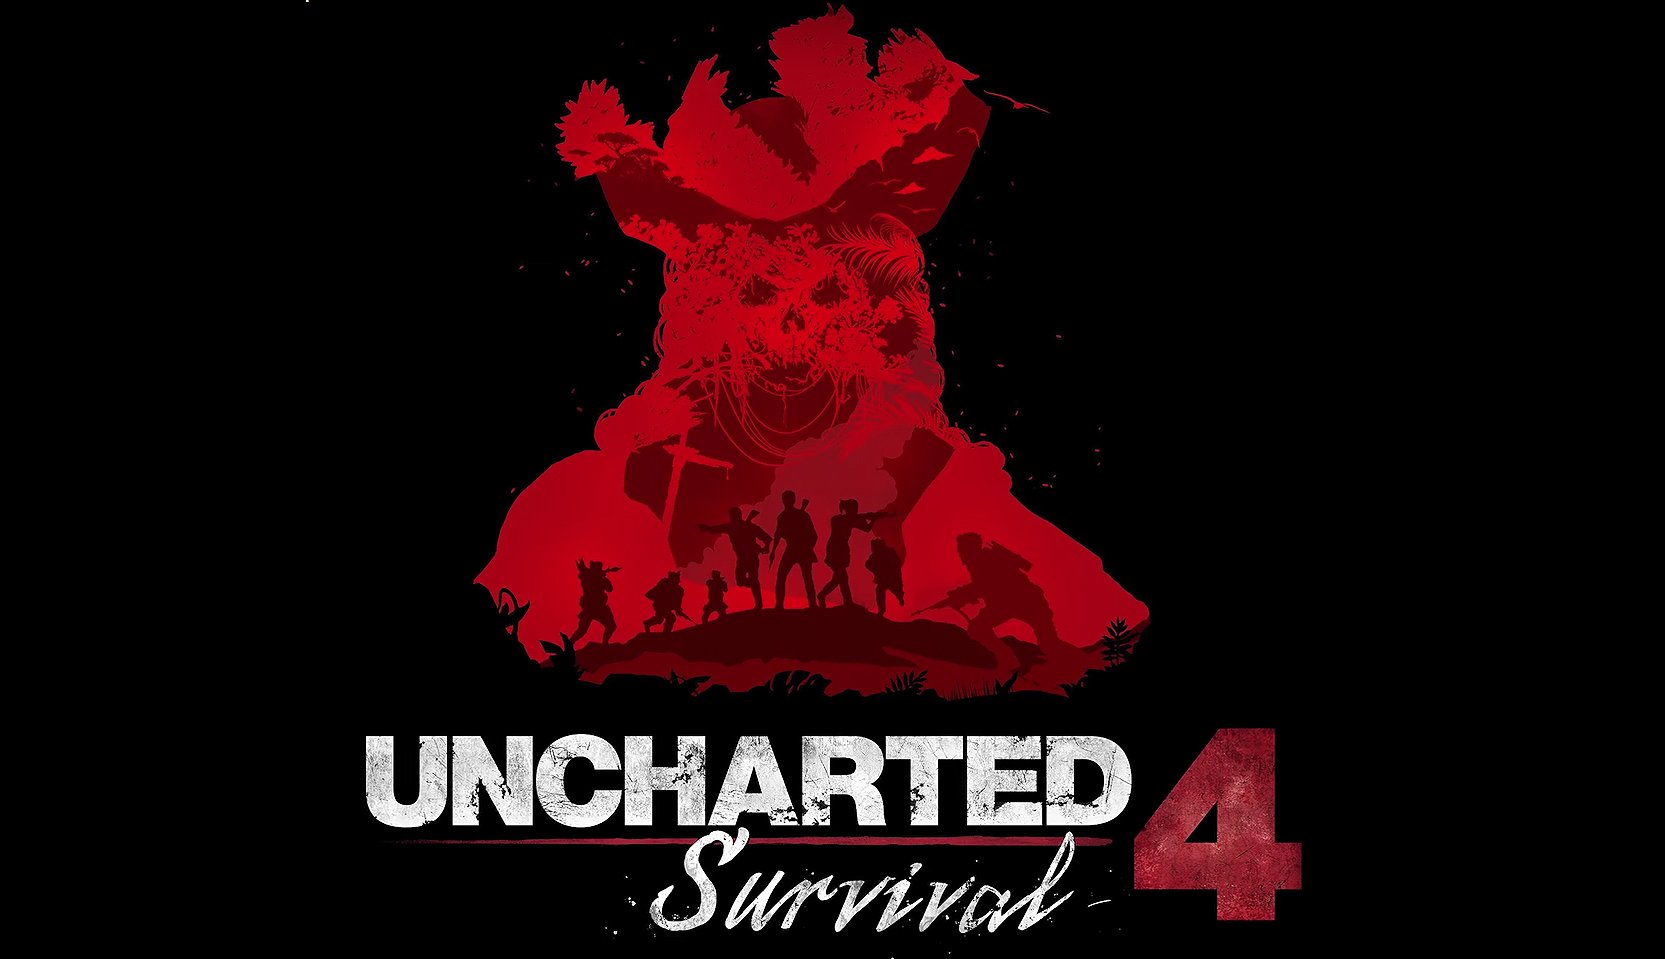 Uncharted 4 Survival